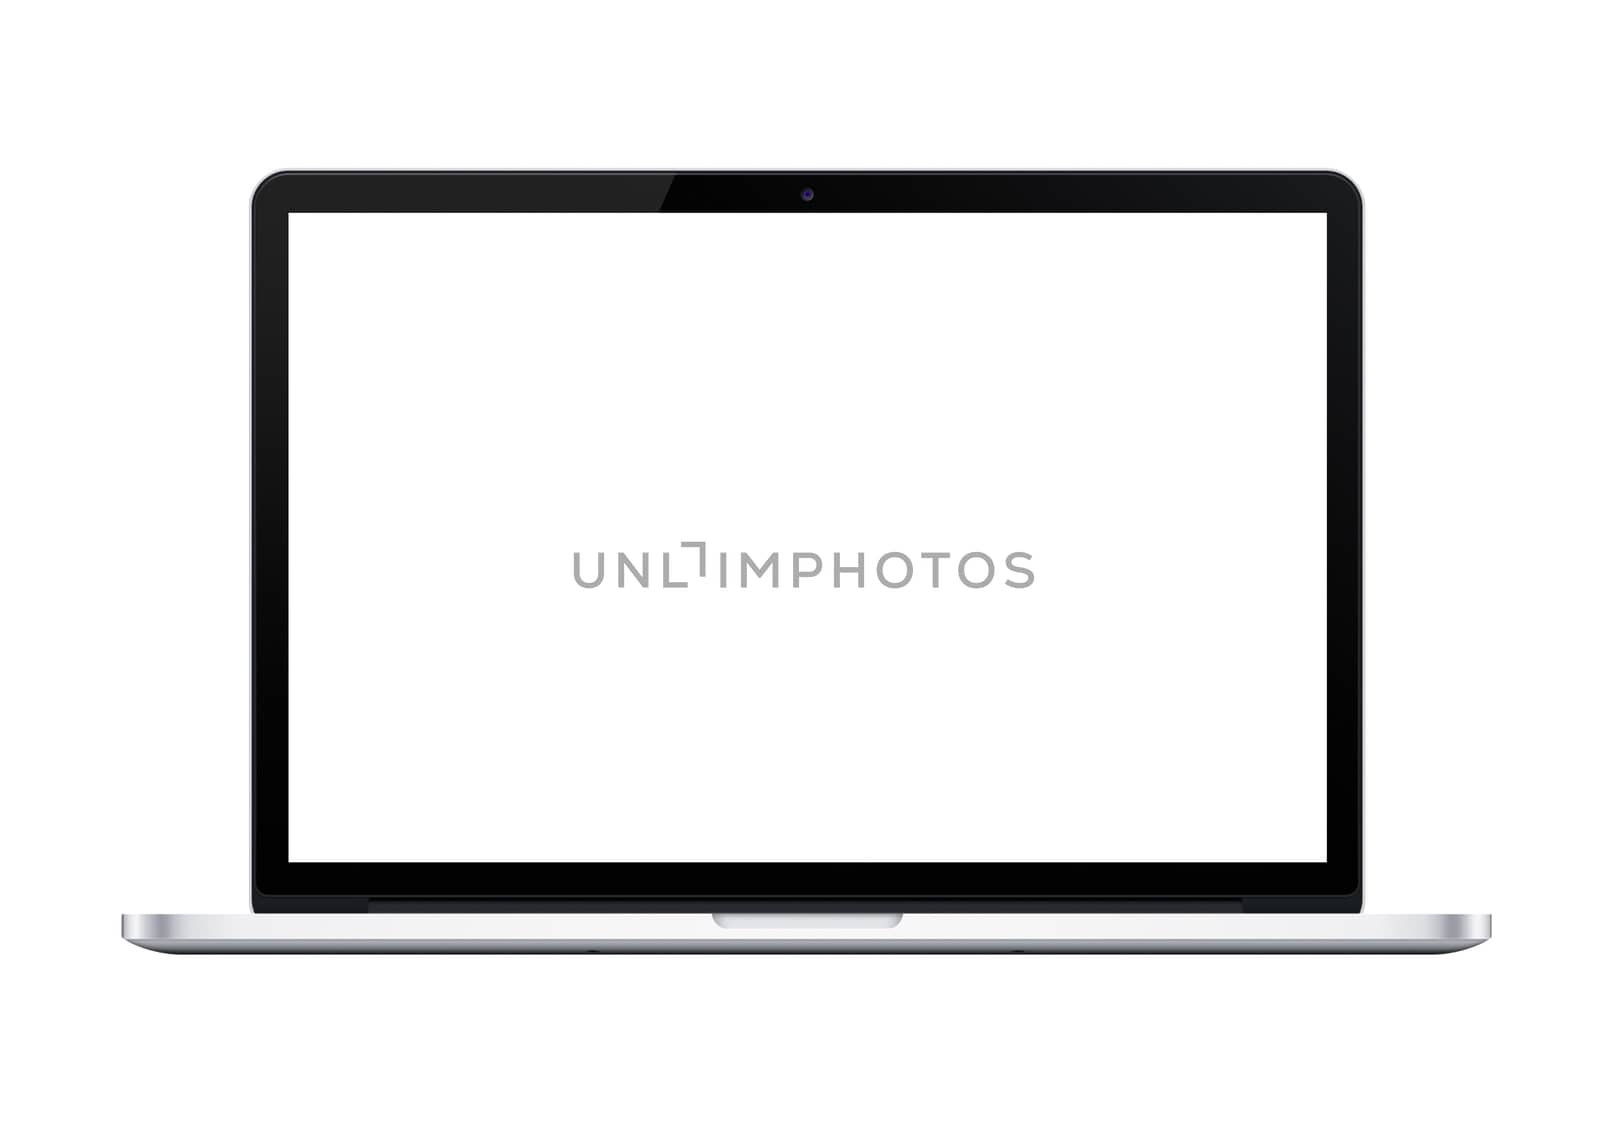 Isolated silver laptop computer mockup on white background by cougarsan